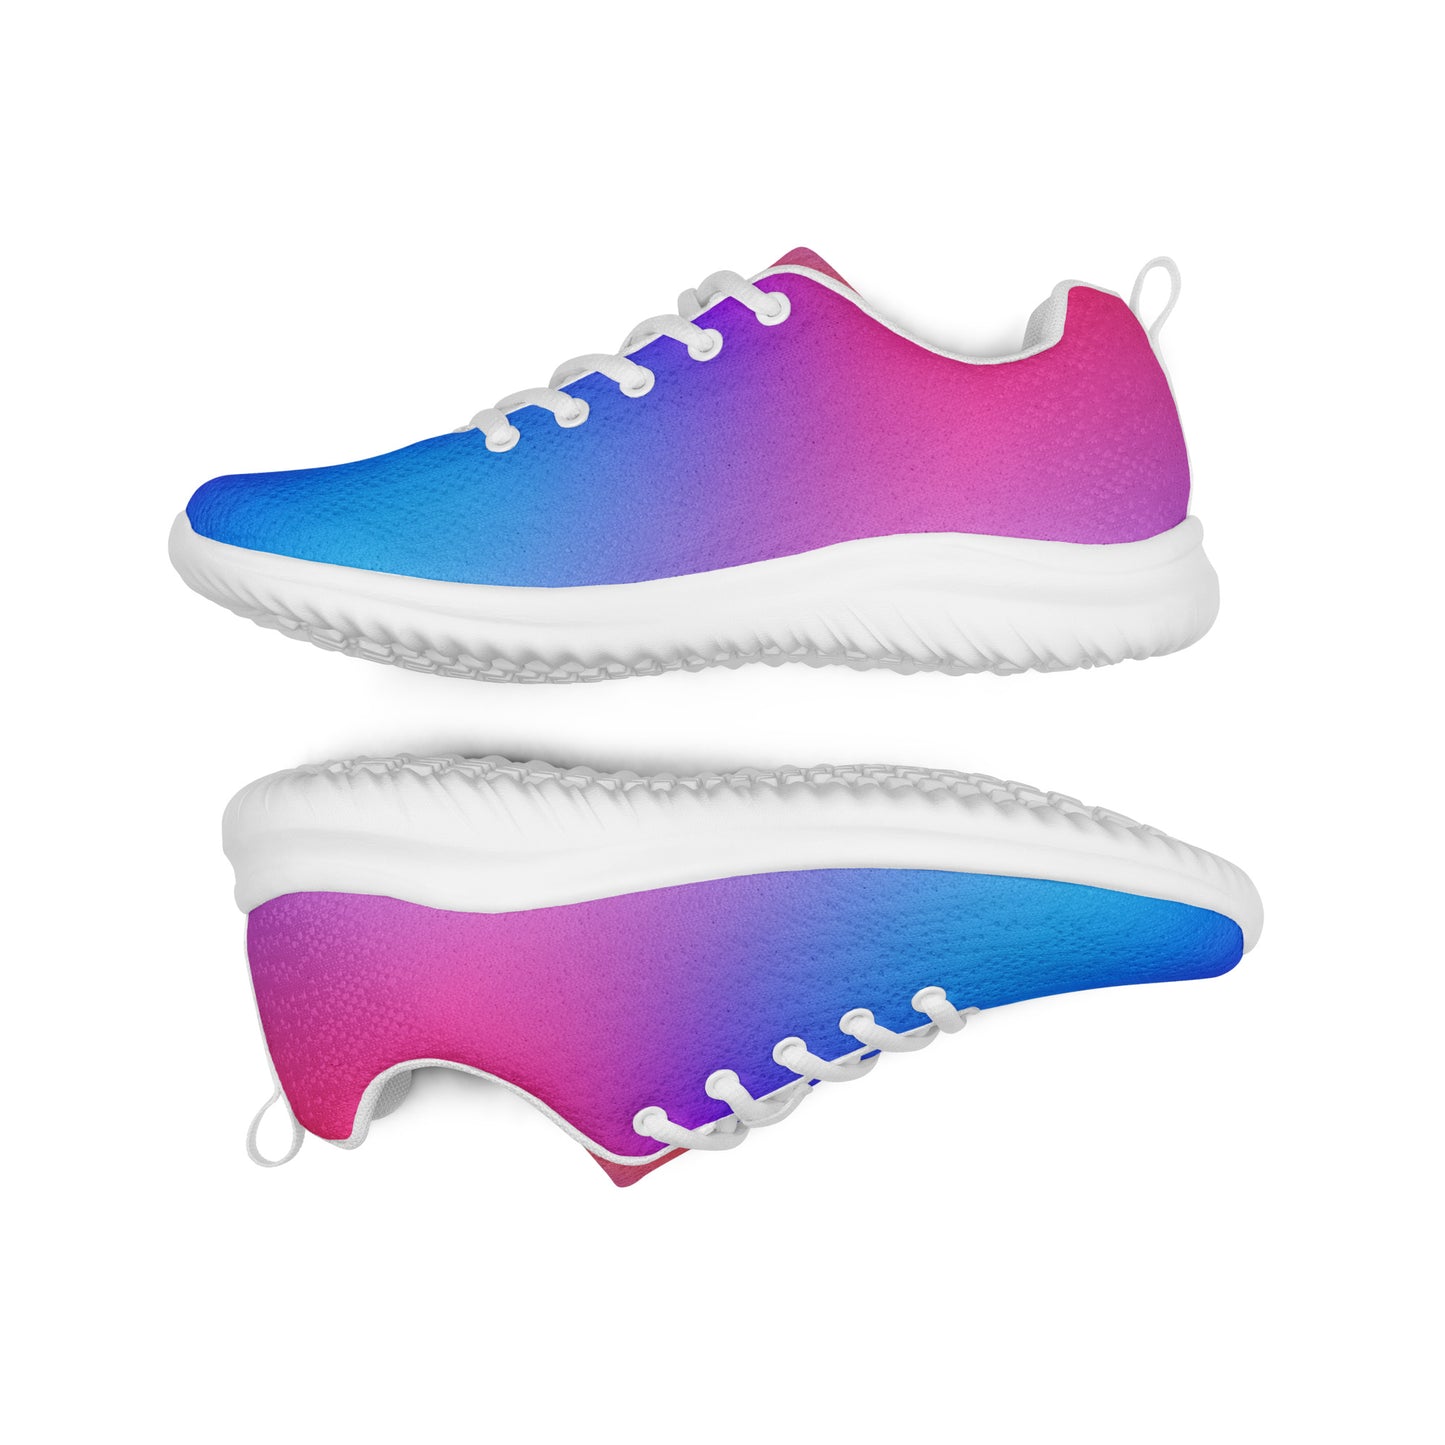 DASH Good Vibes Women’s Athletic Shoes Lightweight Breathable Design by IOBI Original Apparel